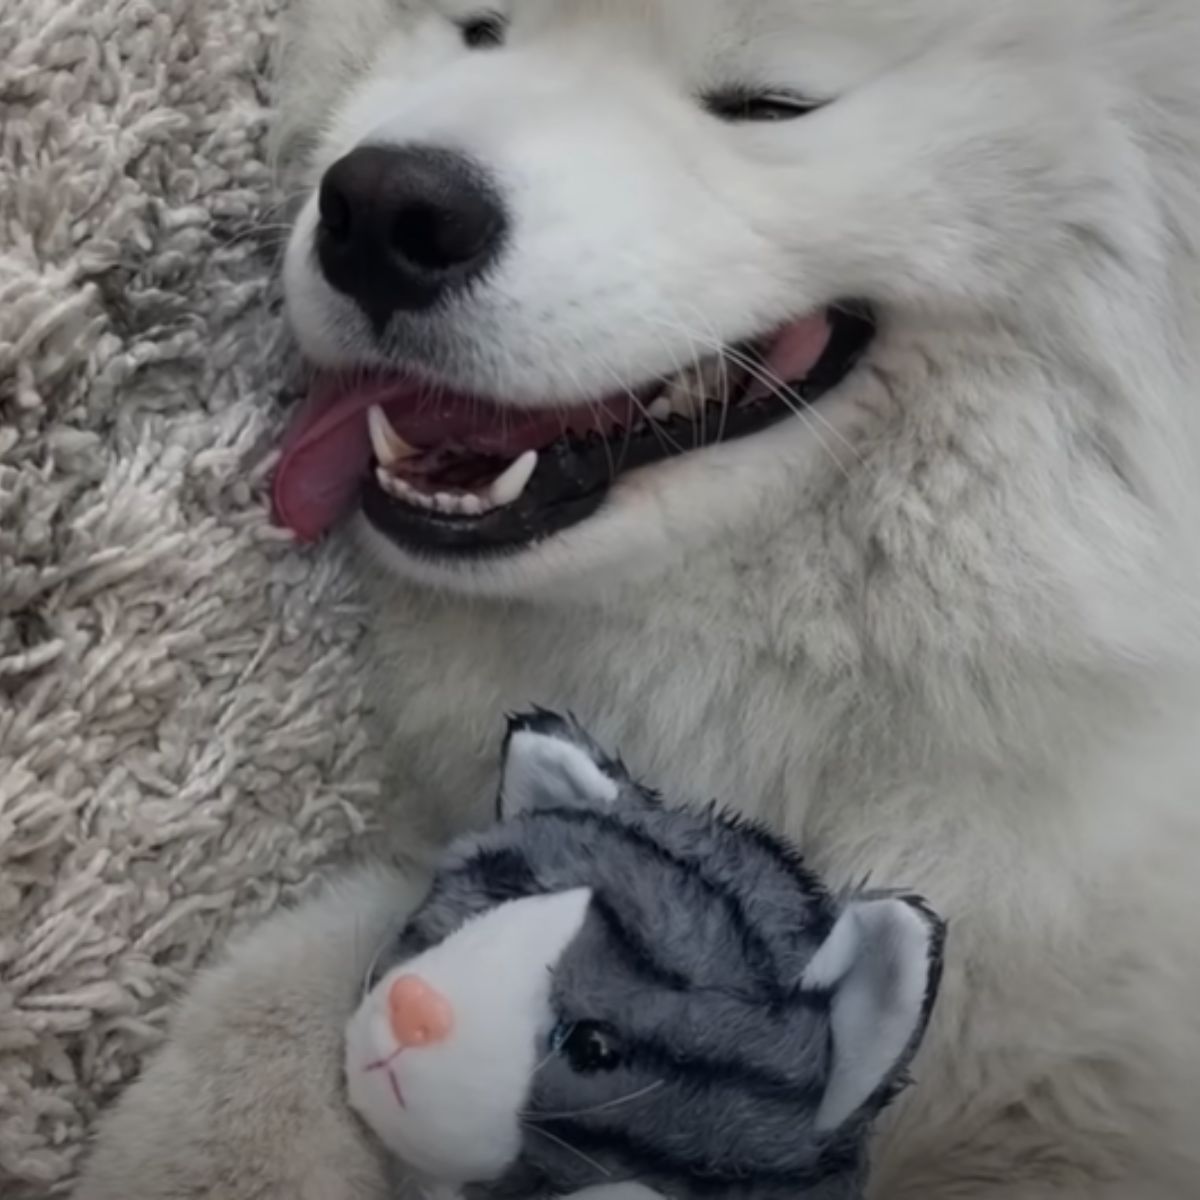 dog lying with a toy